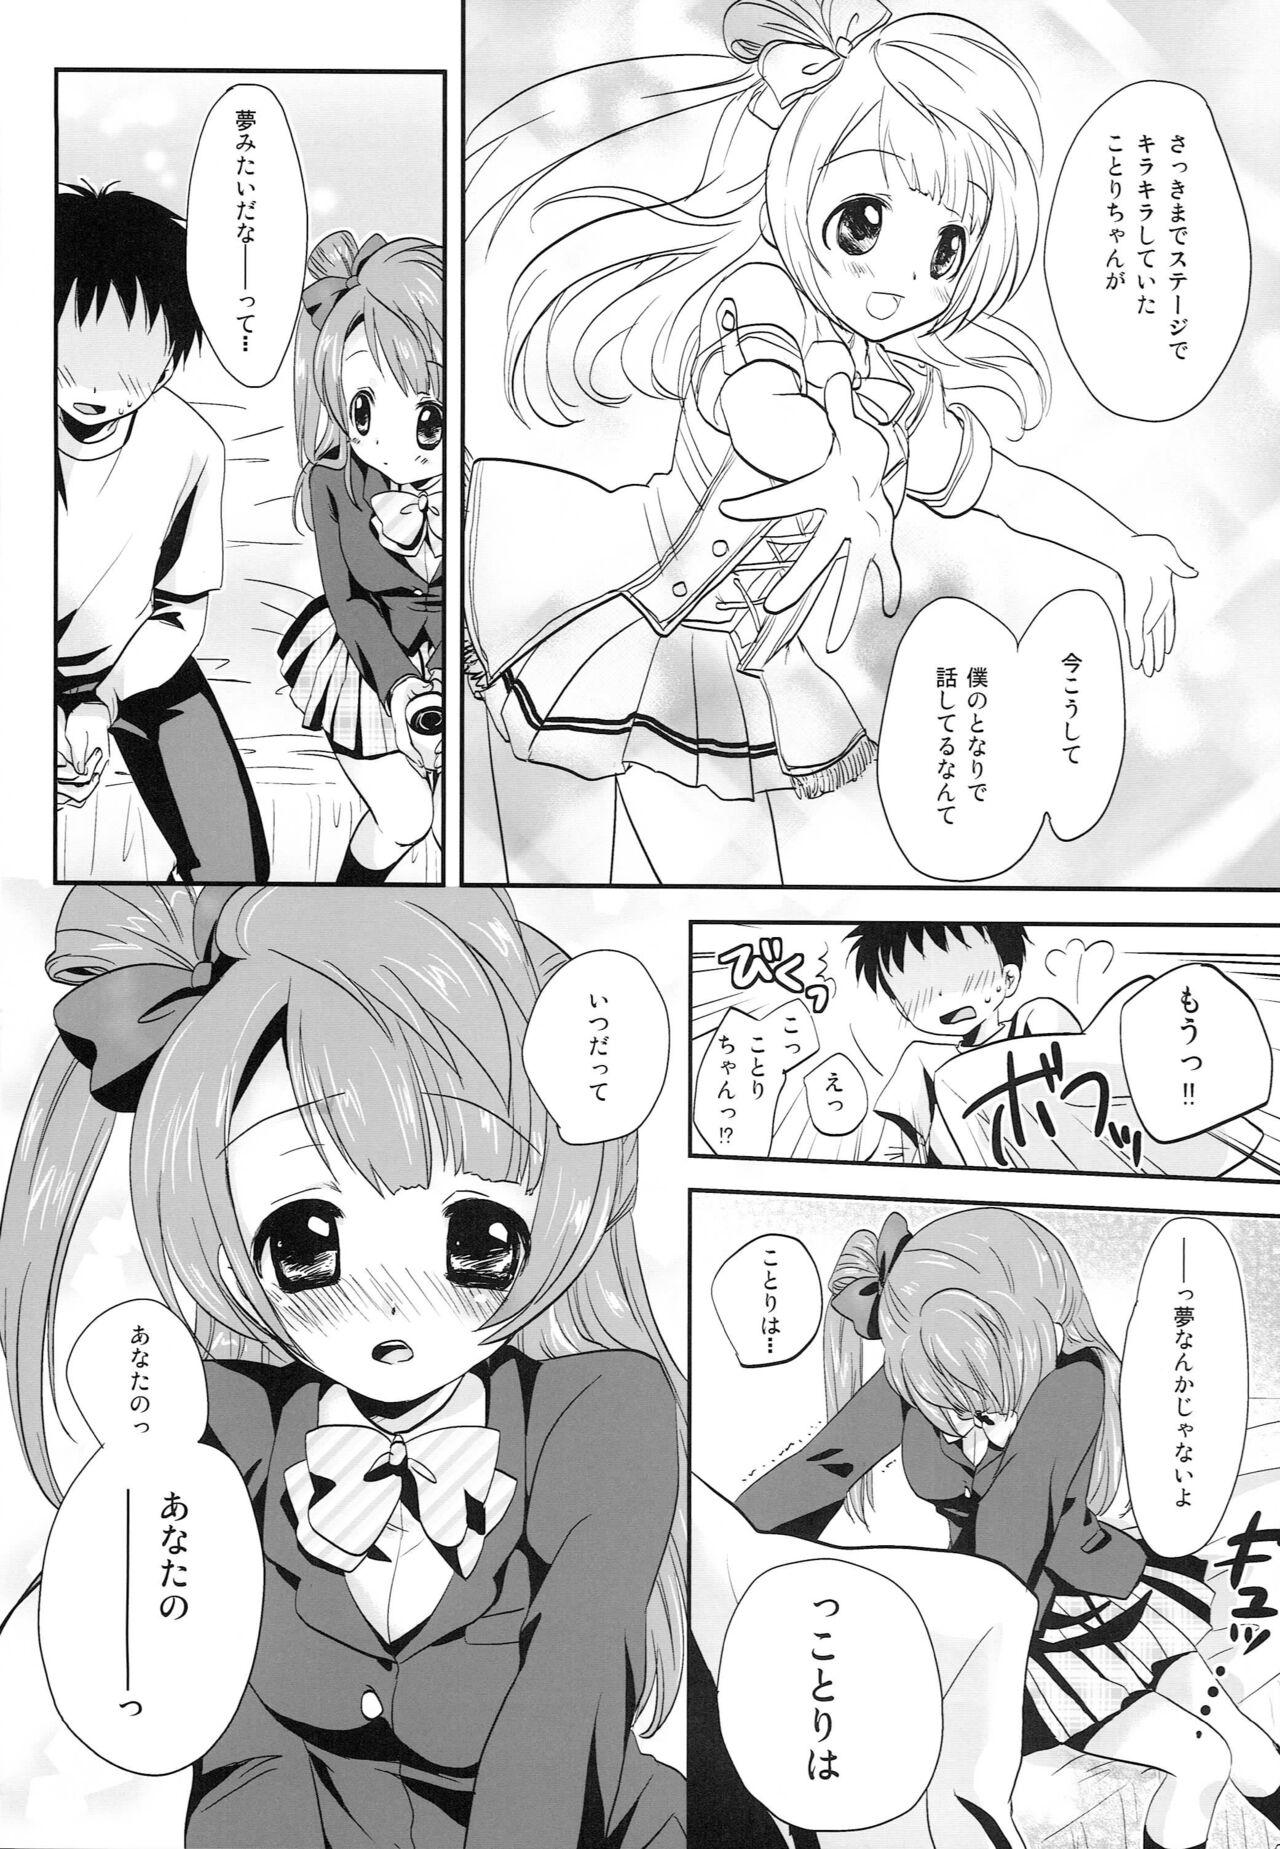 Party KOTORI DREAMING! - Love live Throat - Page 6